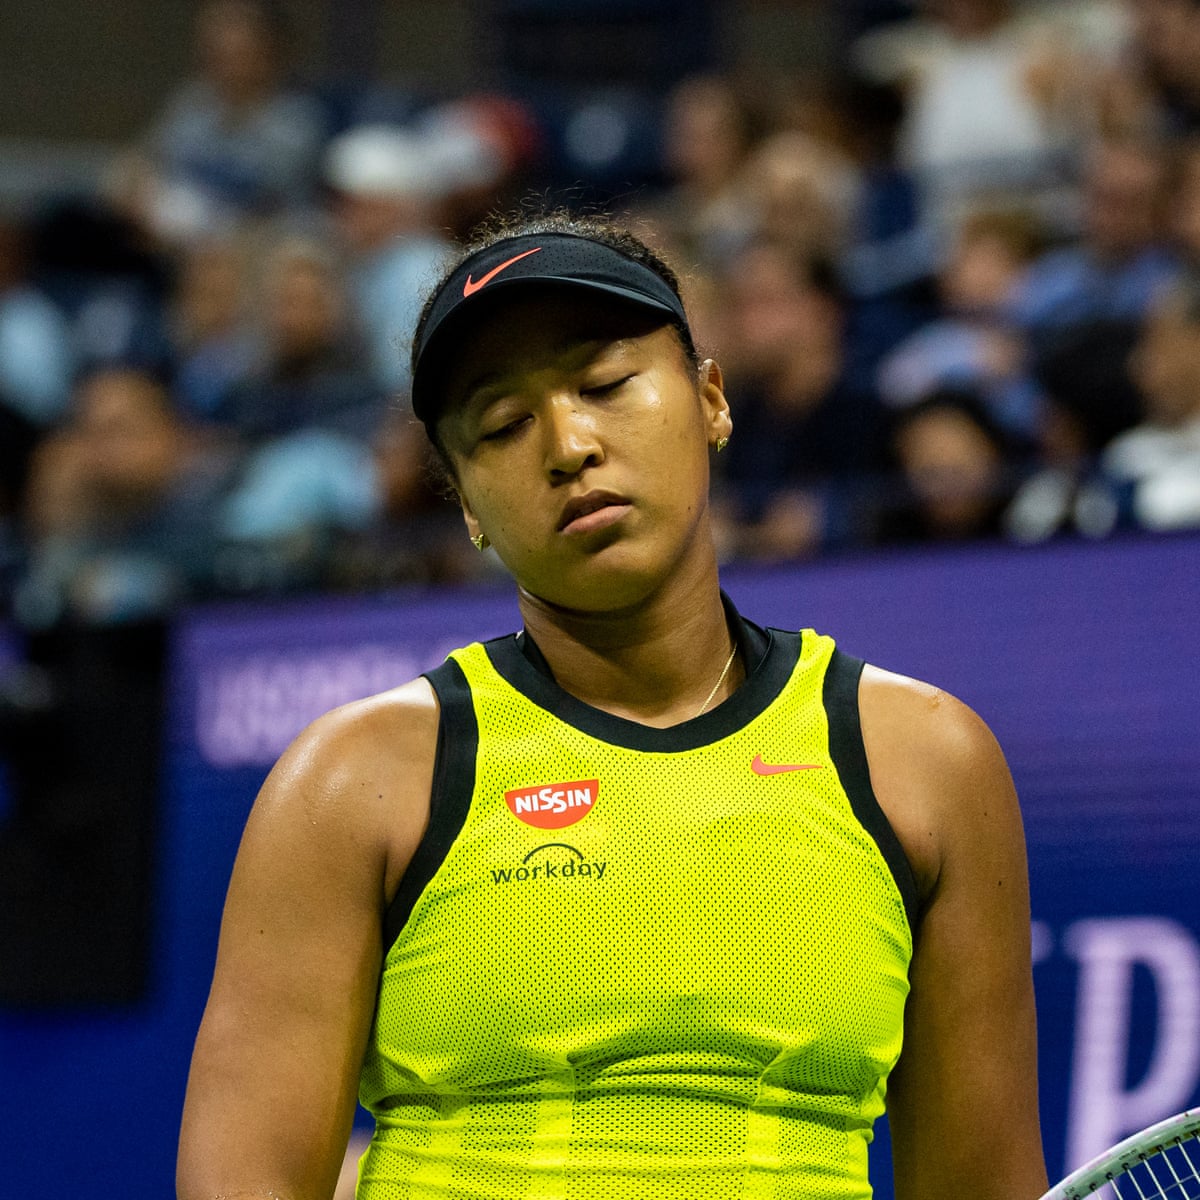 Tearful Naomi Osaka questions future after US Open loss to Leylah Fernandez